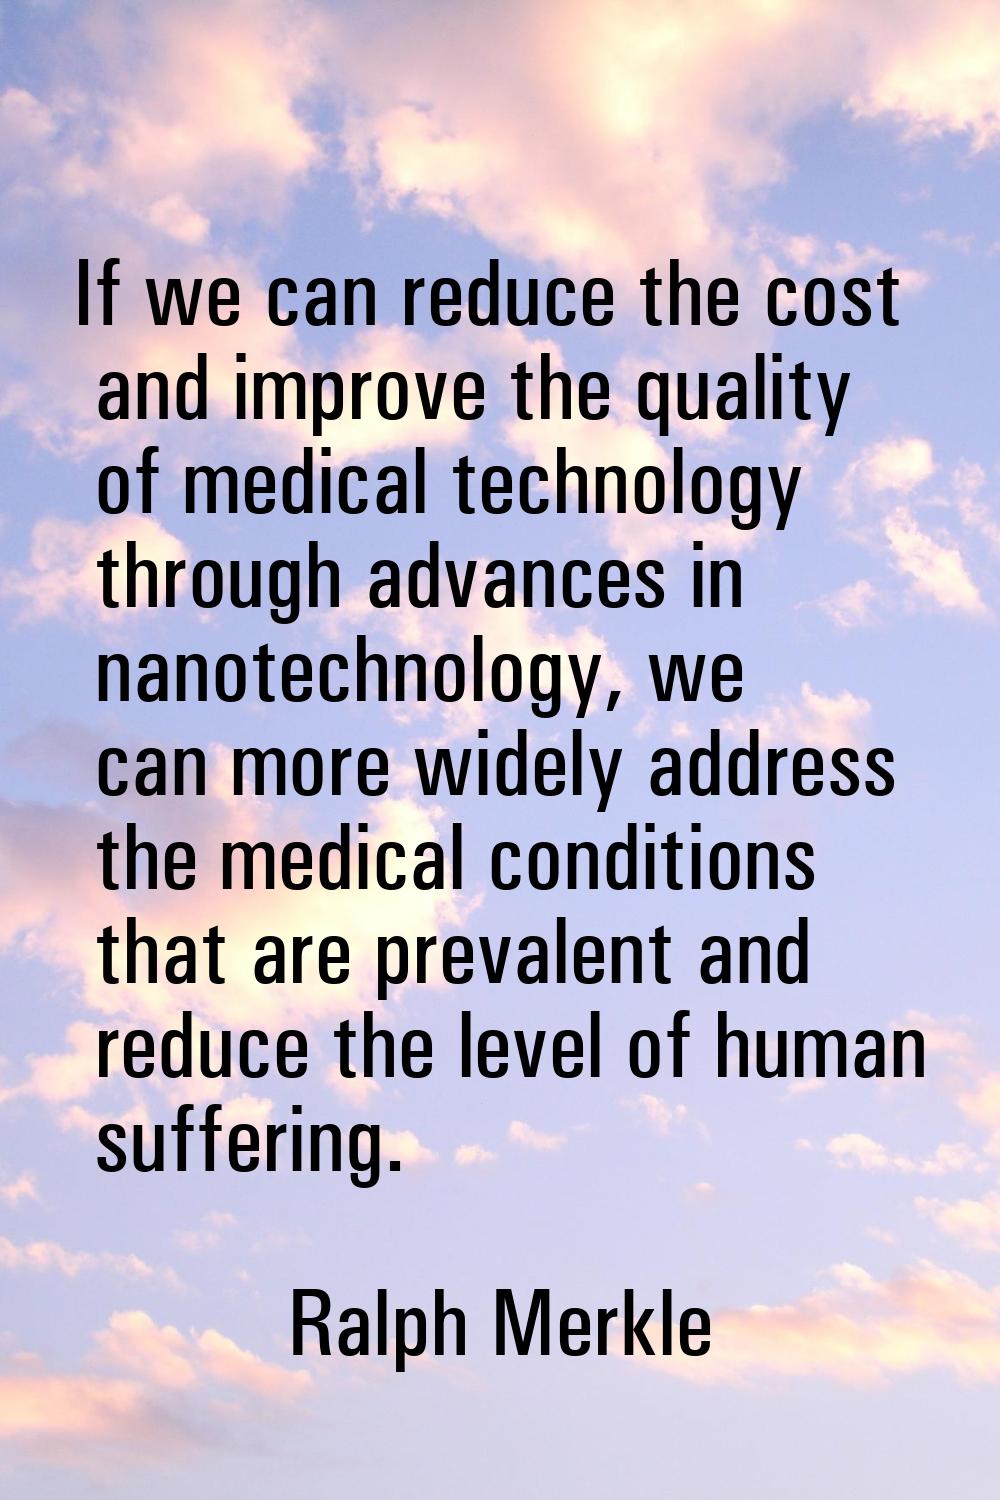 If we can reduce the cost and improve the quality of medical technology through advances in nanotec